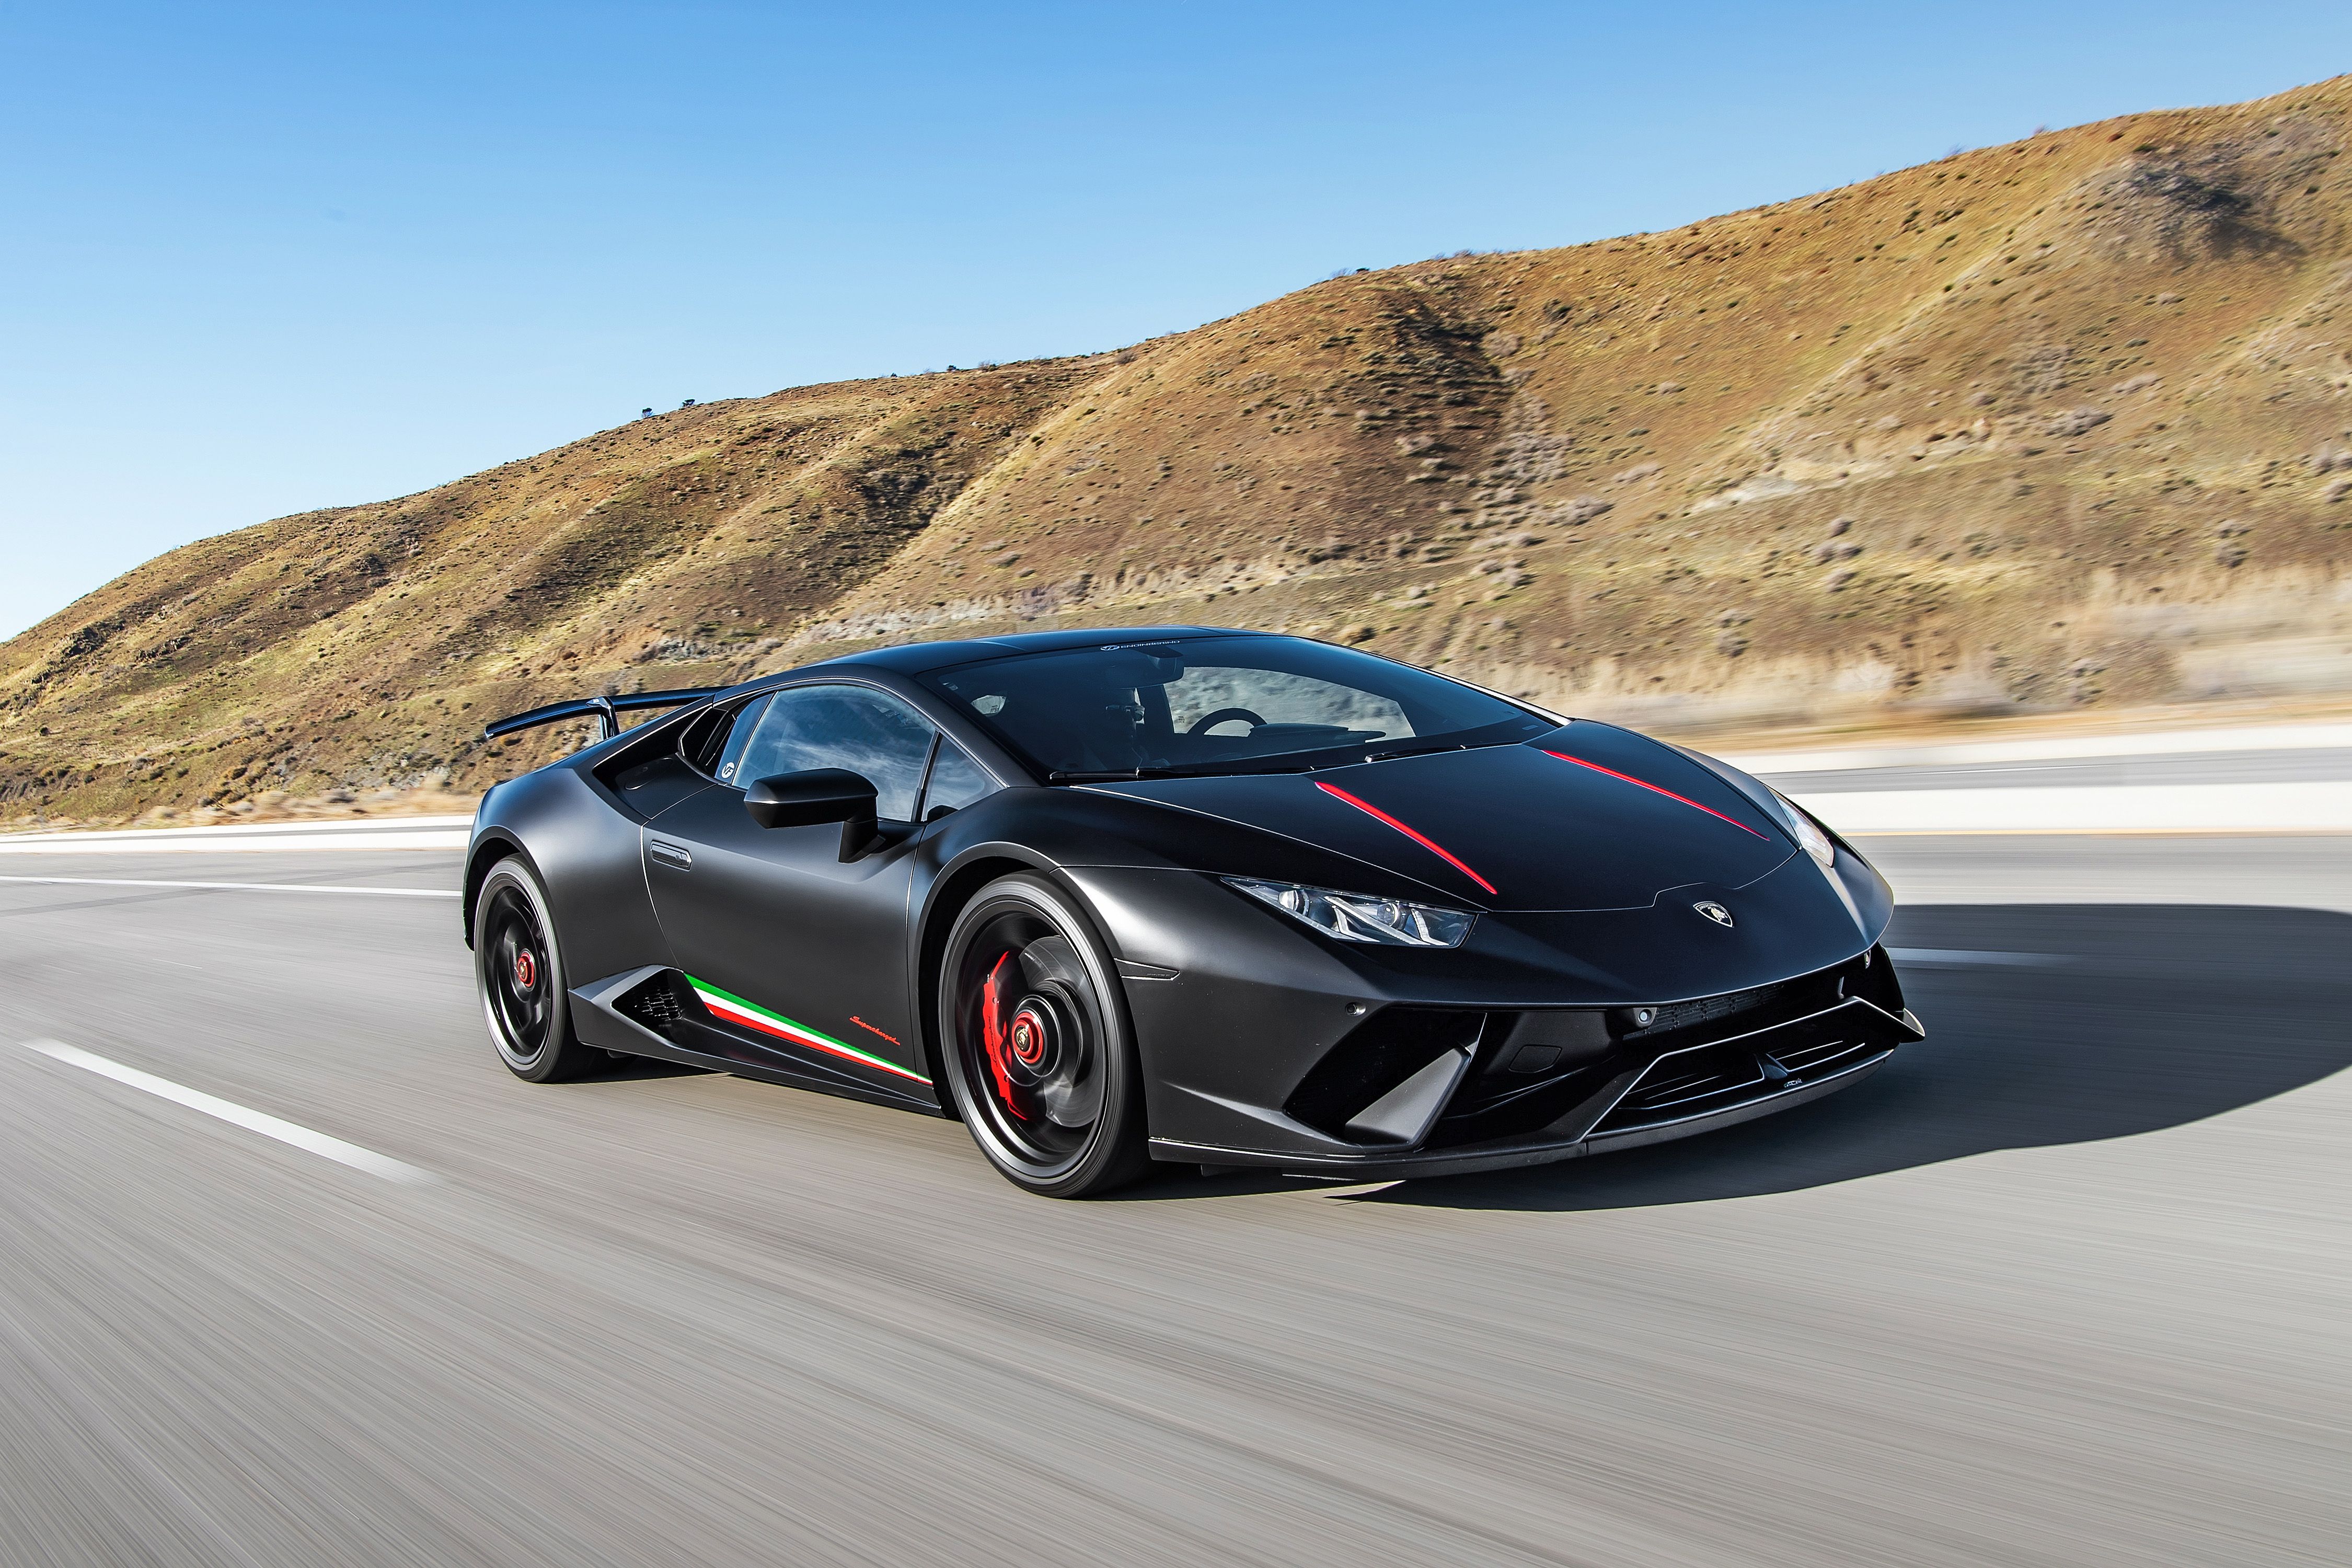 VF Engineering Lamborghini Huracán Is a Beast with Manners